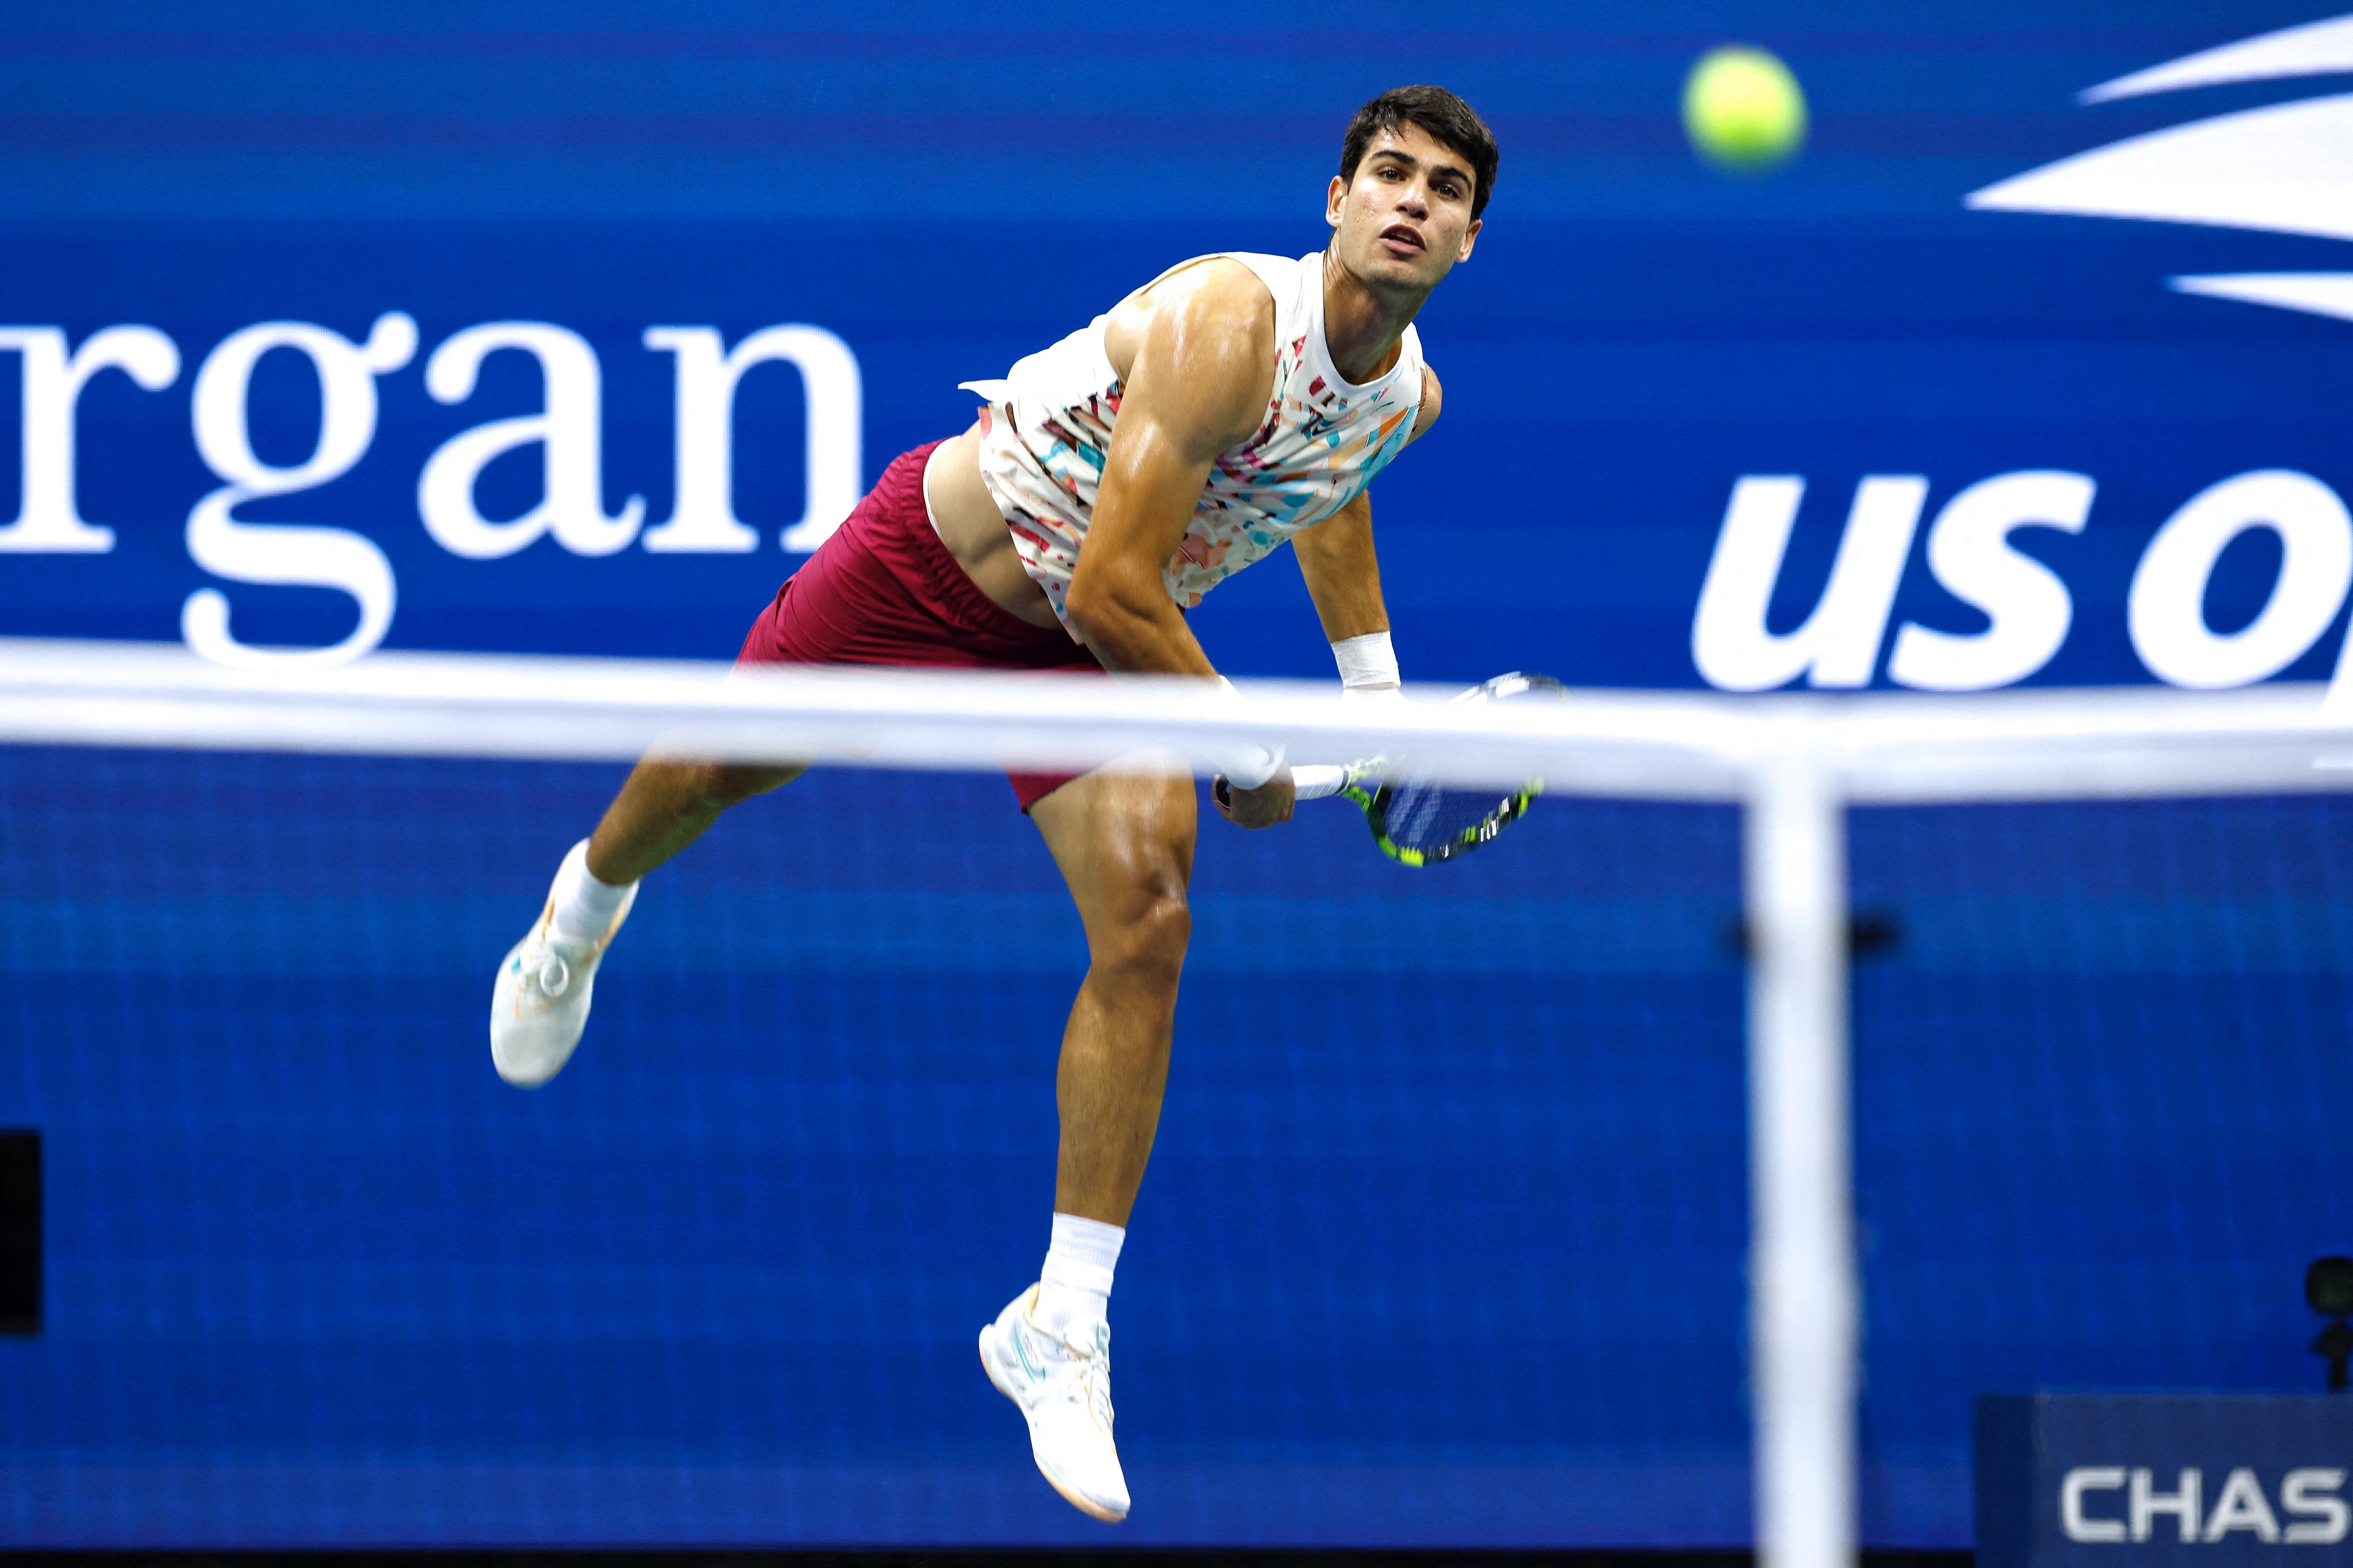 Spain’s Carlos Alcaraz serves to Germany’s Dominik Koepfer during the US Open tennis tournament men’s singles first round match at the USTA Billie Jean King National Tennis Center in New York City, on August 29, 2023.